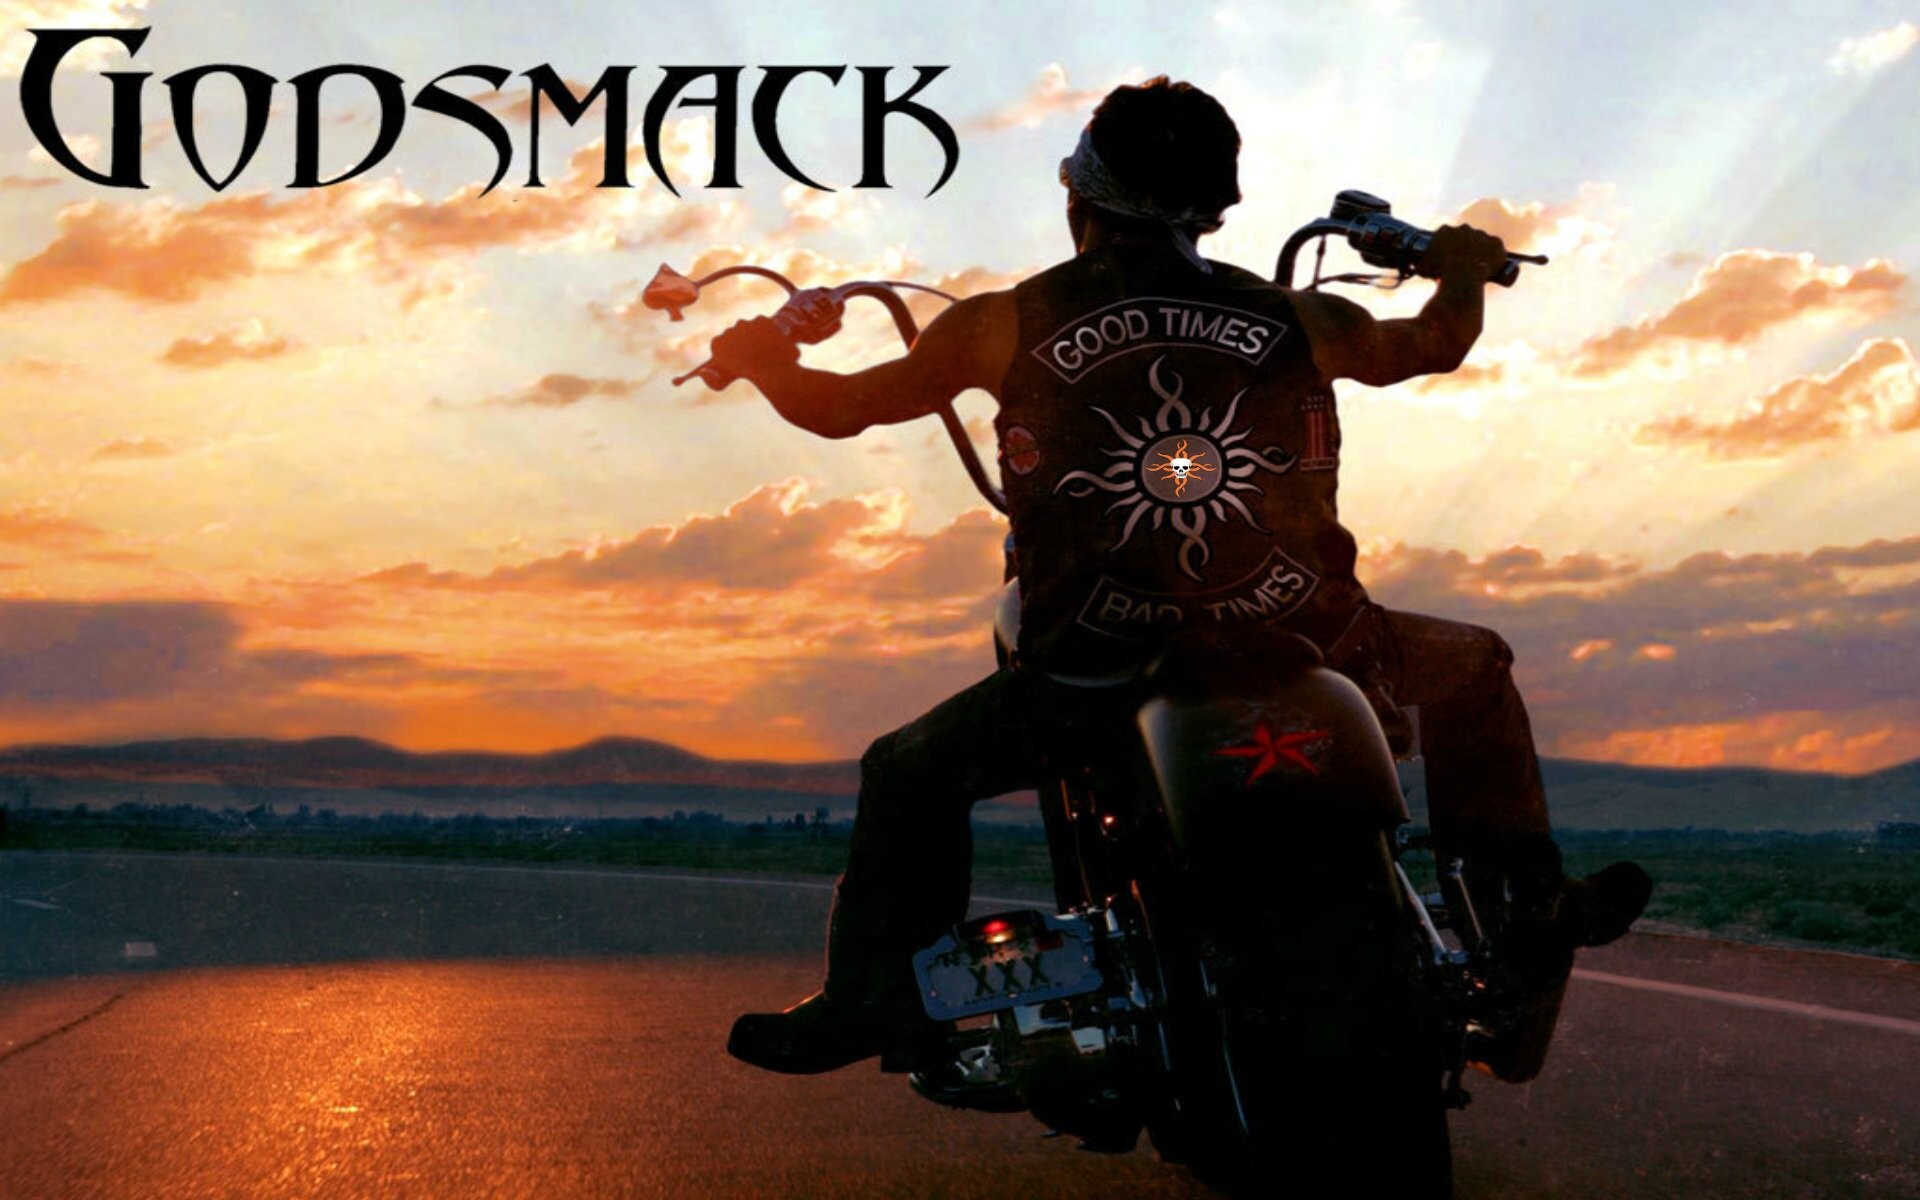 Godsmack: Good Times, Bad Times, Speak the truth or make your peace some other way. 1920x1200 HD Wallpaper.